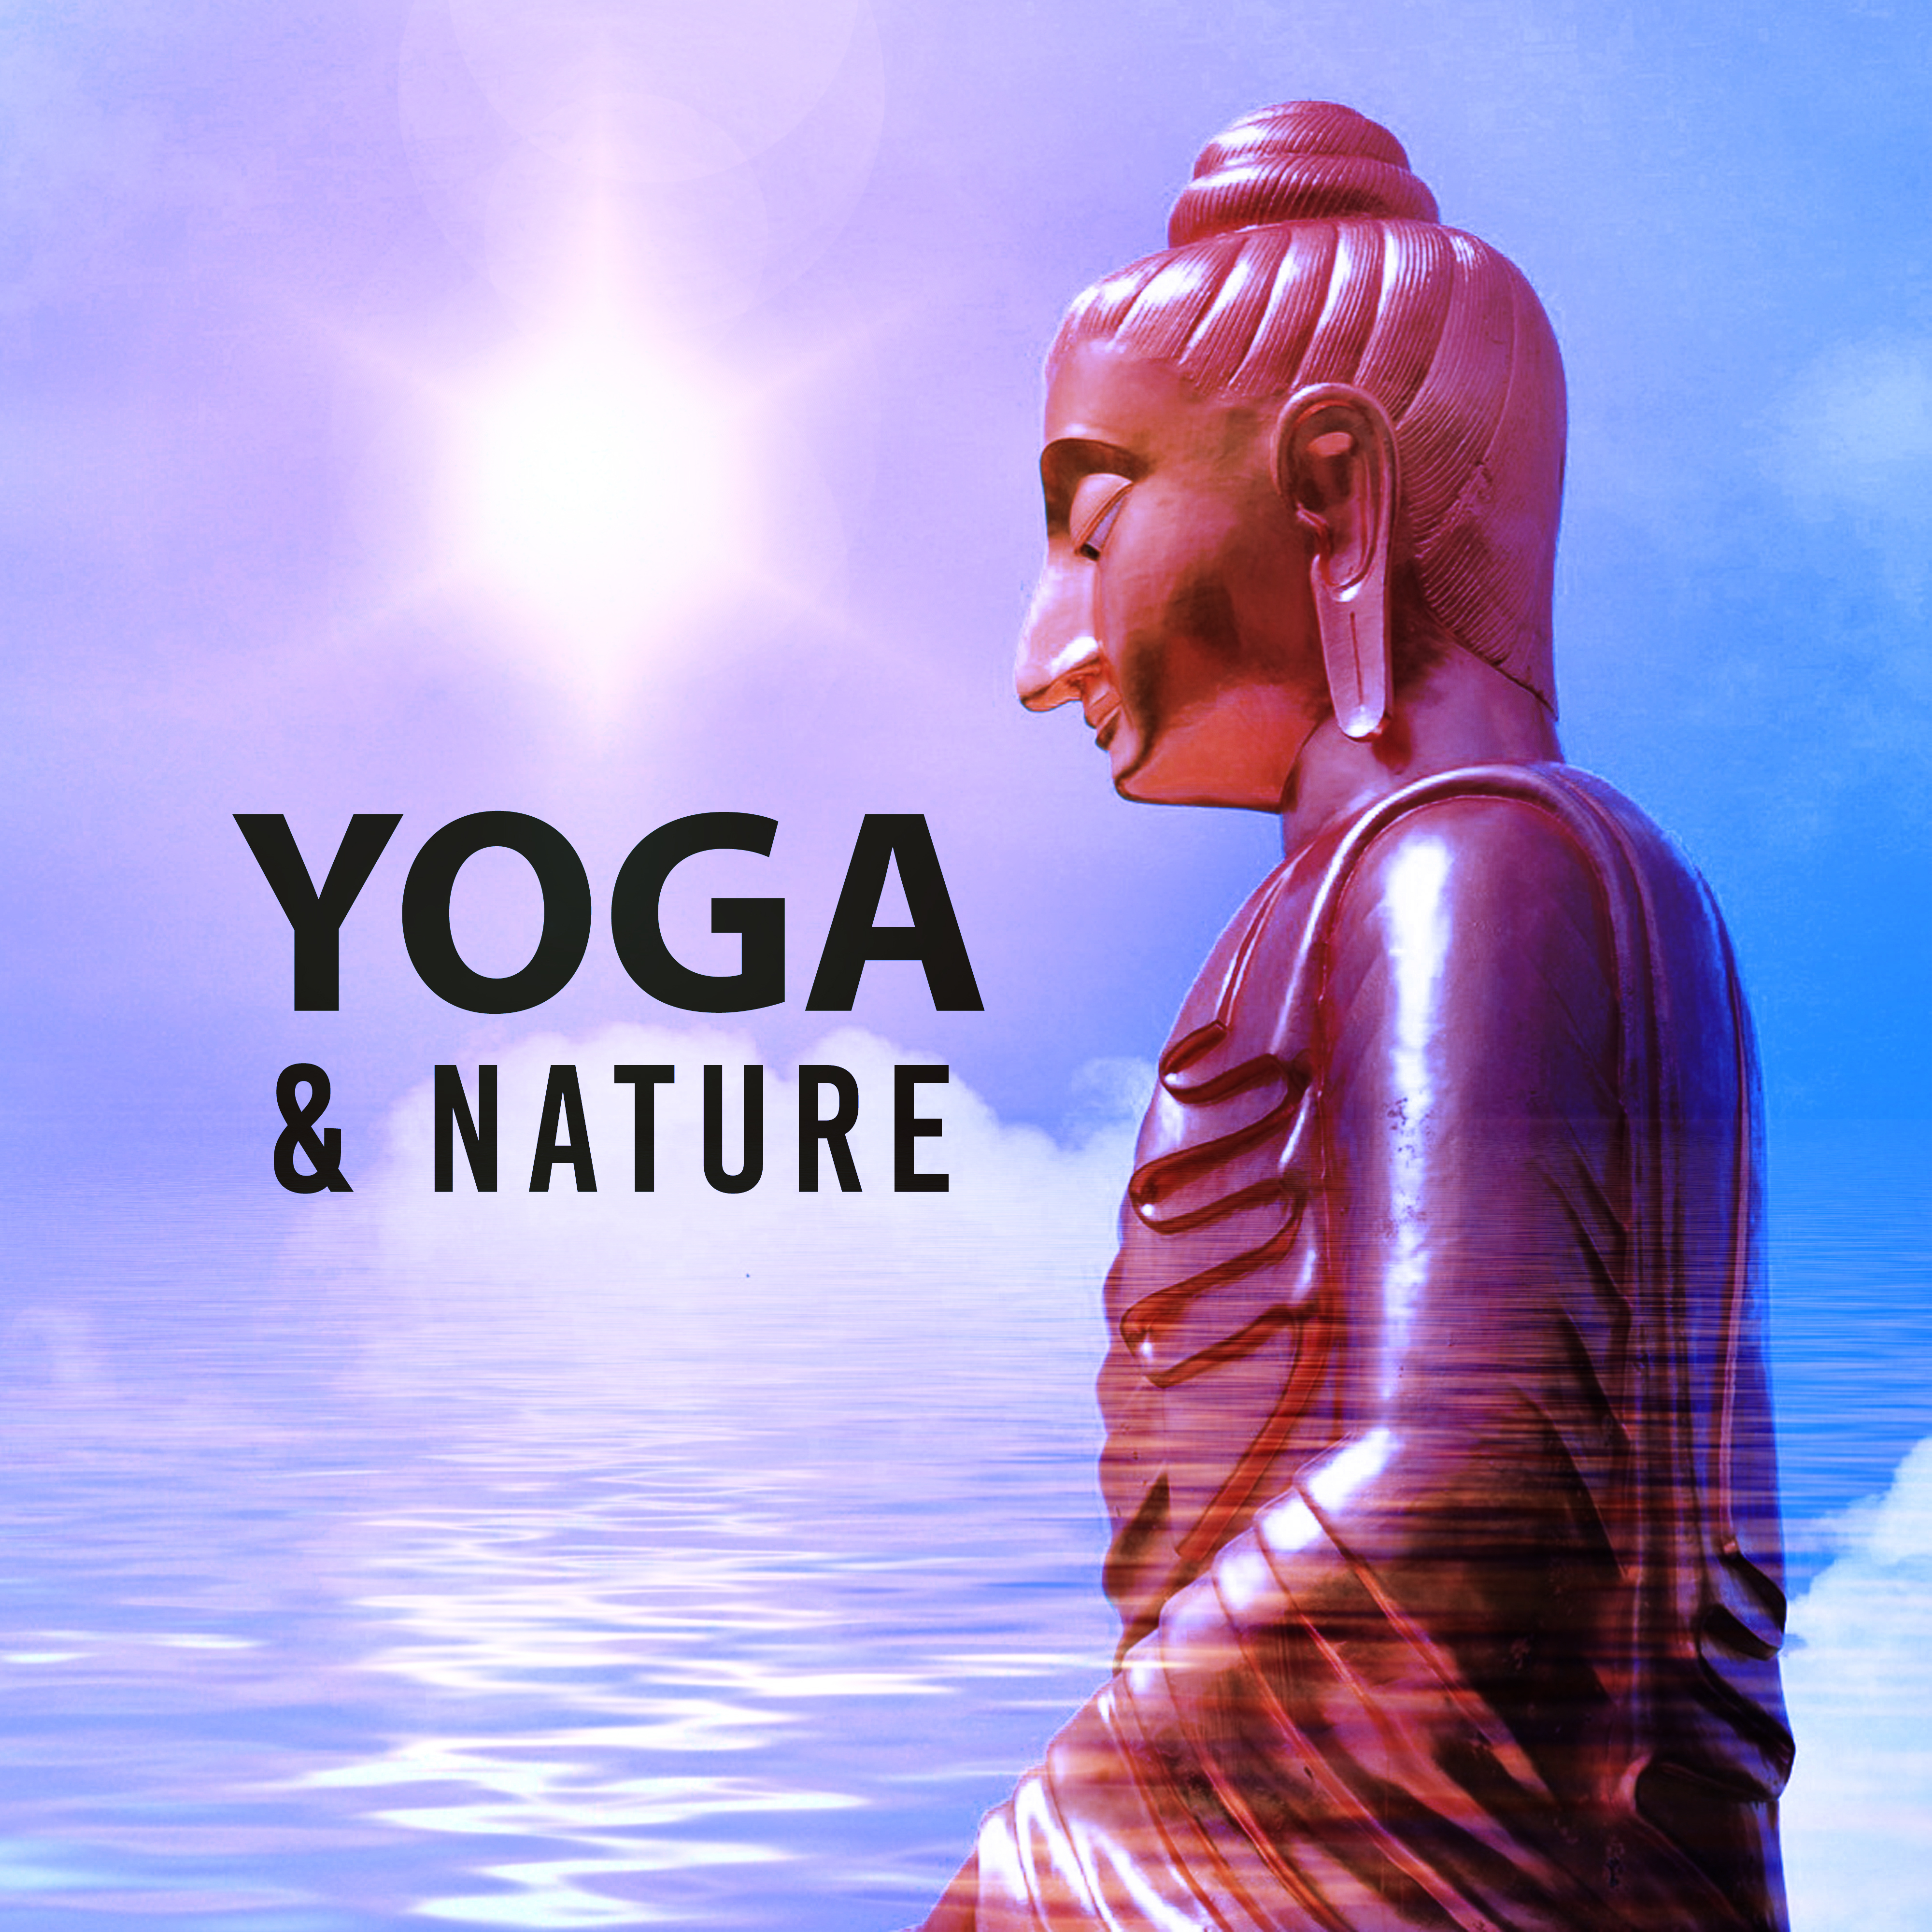 Yoga  Nature  Healing Music, New Age Sounds for Meditation, Yoga Training, Zen, Reiki, Stress Relief, Nature Sounds